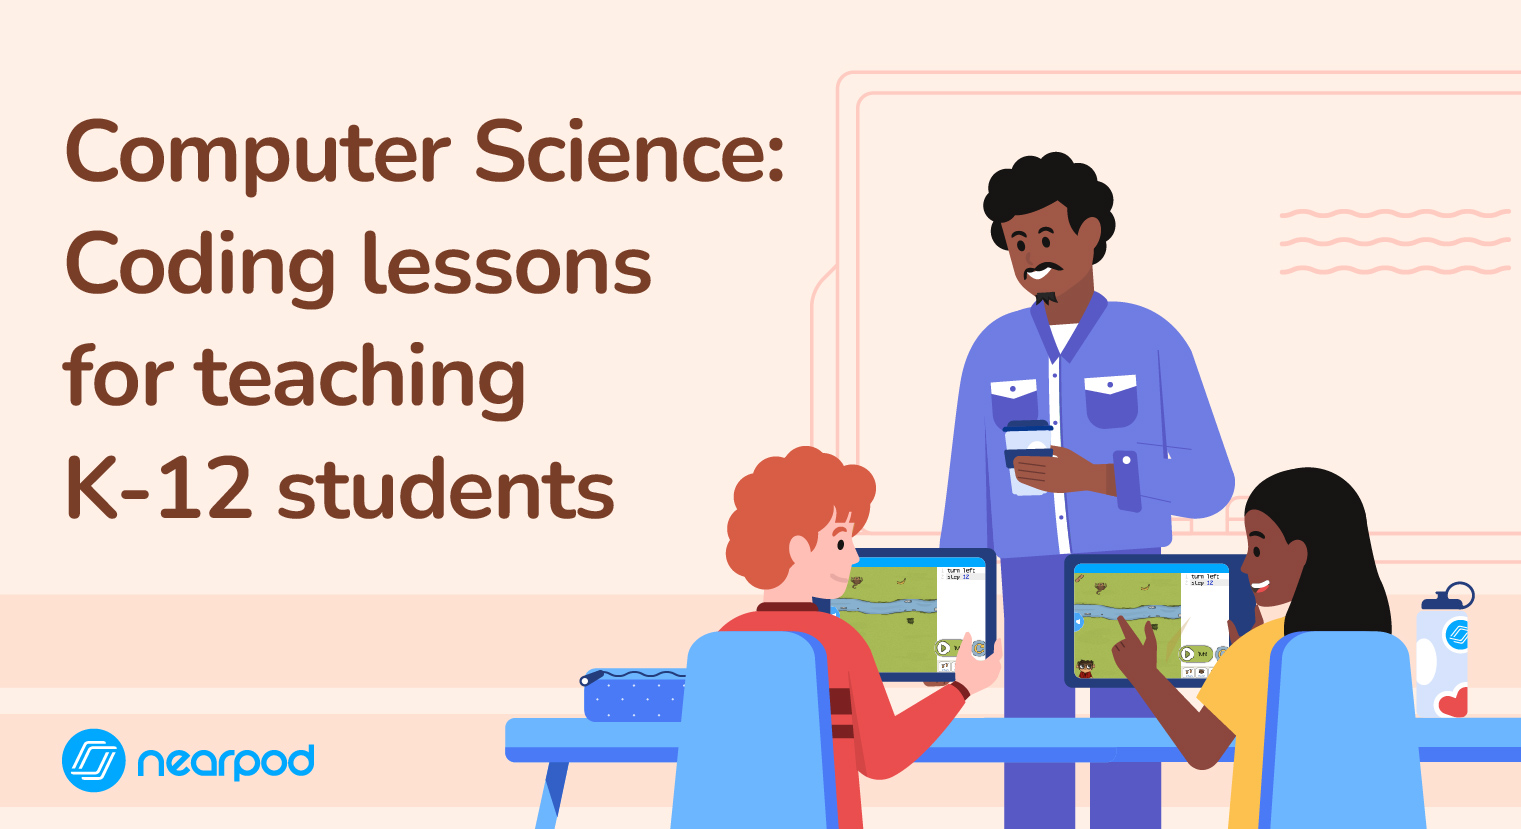 Computer Science: Coding lessons for teaching K-12 students blog image